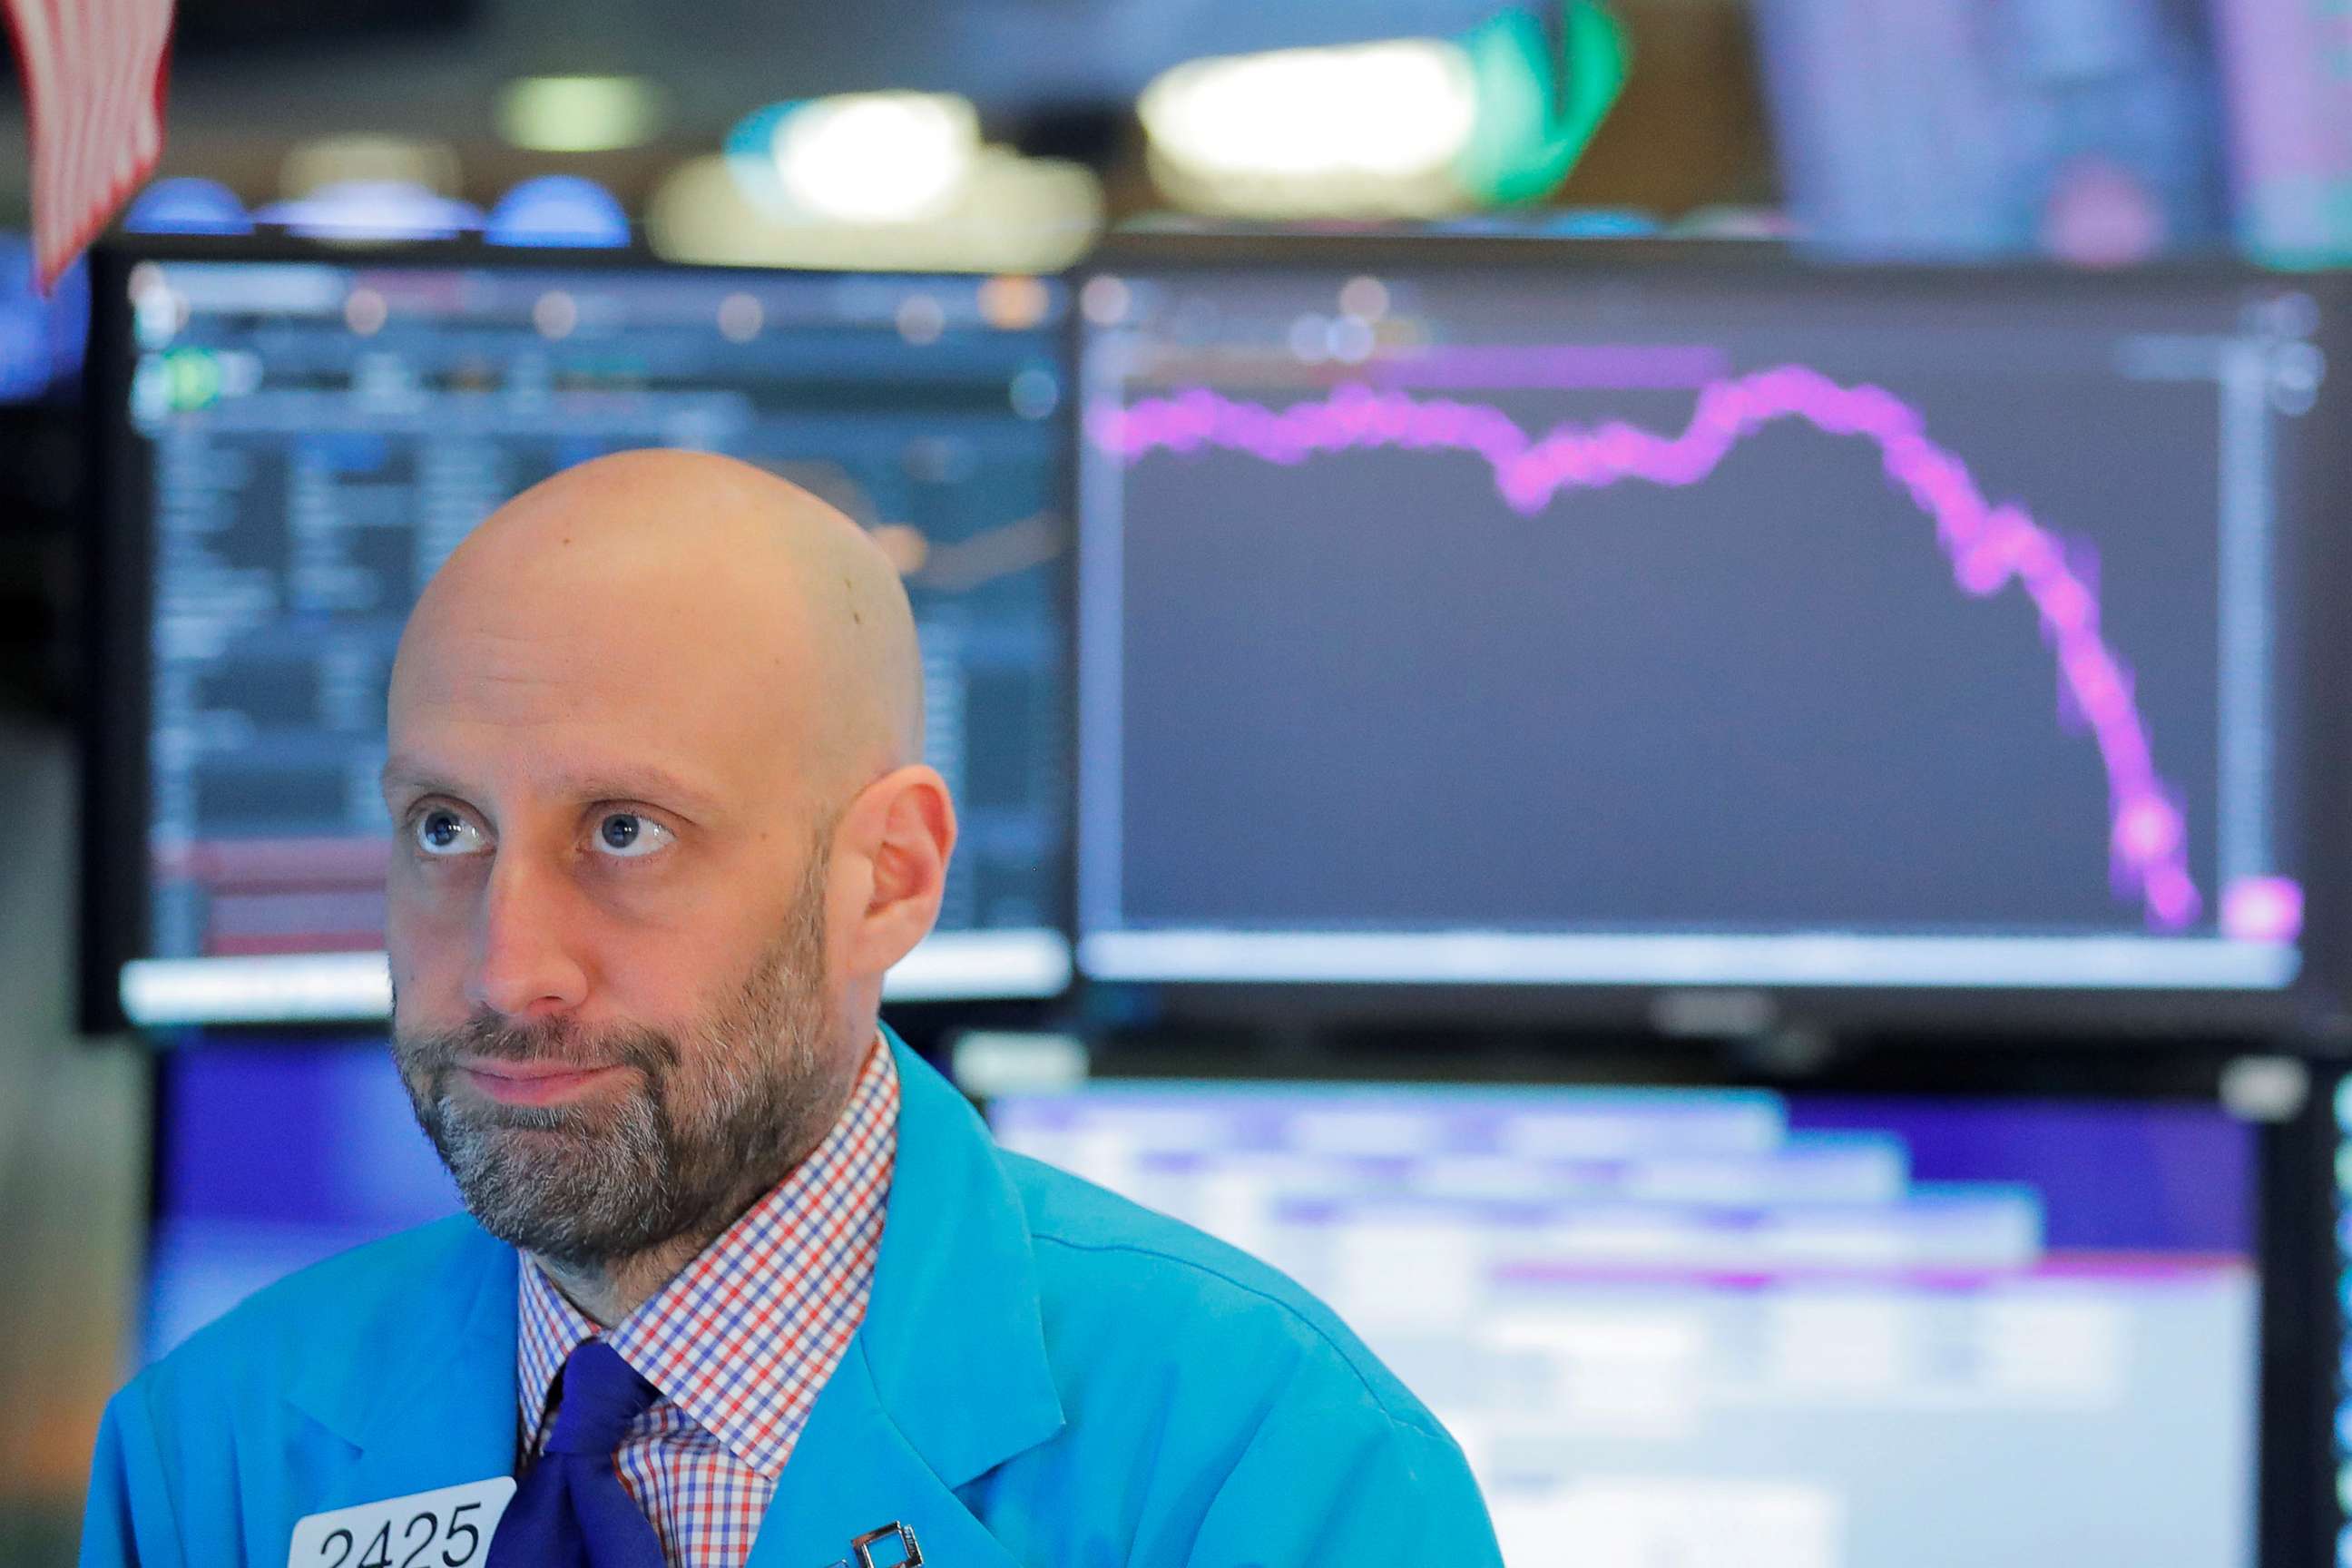 PHOTO: A trader works on the floor of the New York Stock Exchange as coronavirus disease (COVID-19) cases in the city of New York rise, in New York, March 16, 2020.